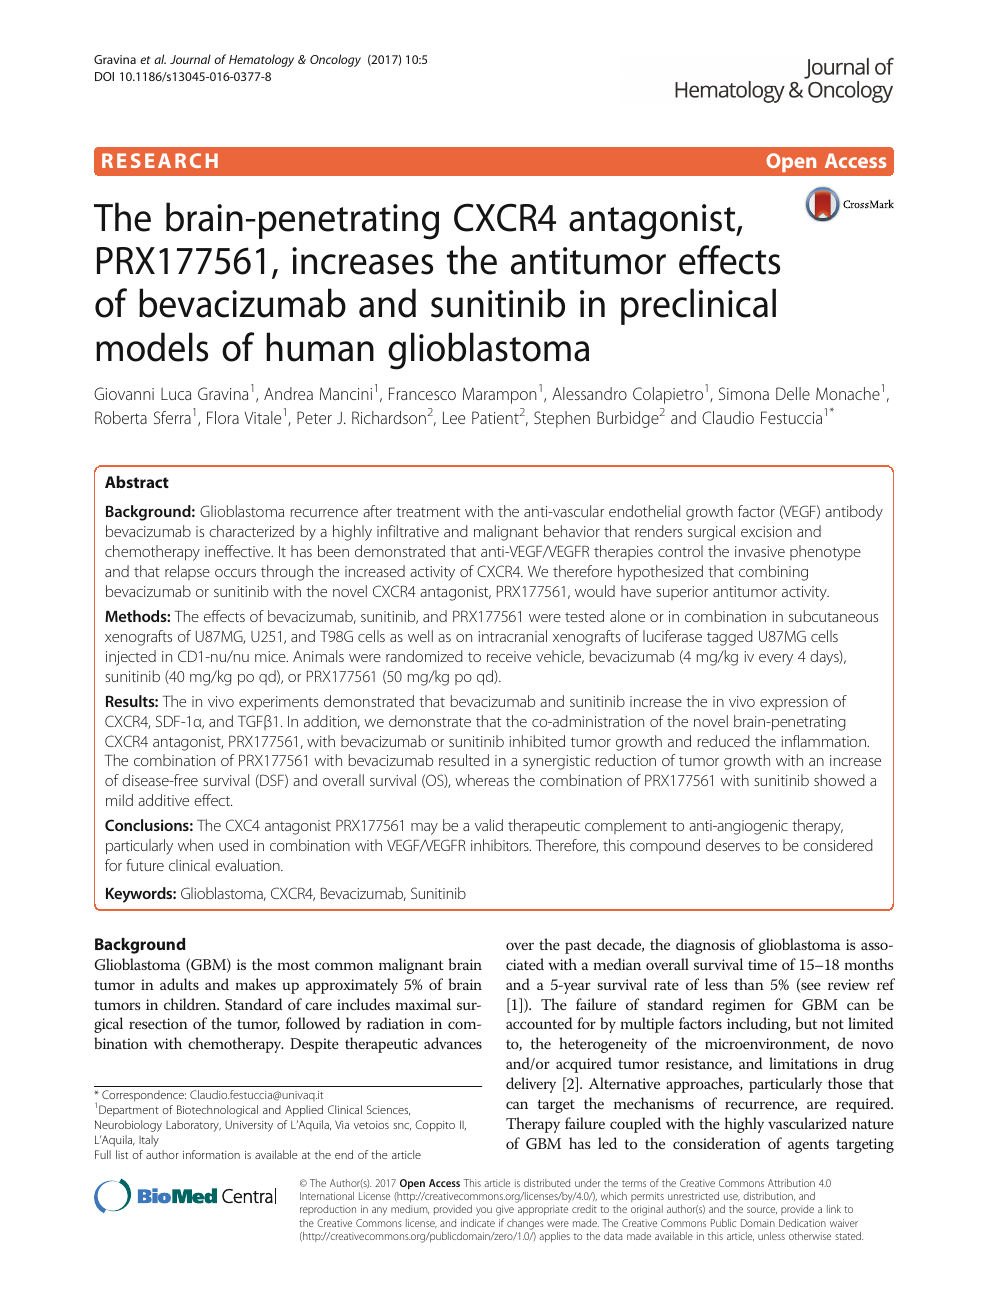 The Brain Penetrating Cxcr4 Antagonist Prx Increases The Antitumor Effects Of Bevacizumab And Sunitinib In Preclinical Models Of Human Glioblastoma Topic Of Research Paper In Clinical Medicine Download Scholarly Article Pdf And